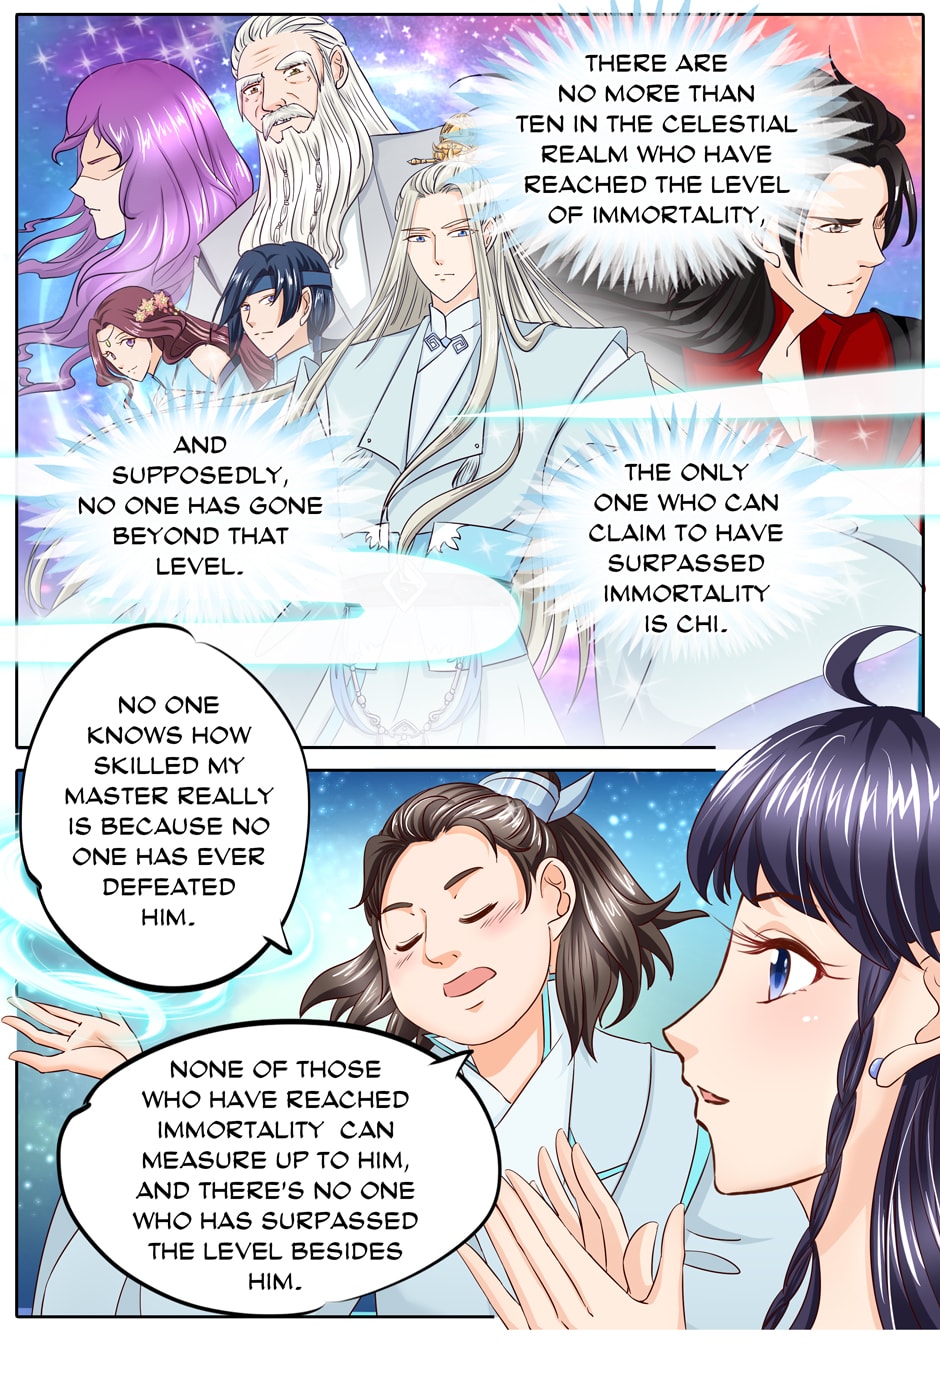 What Should I Do With My Brother? Ch. 35